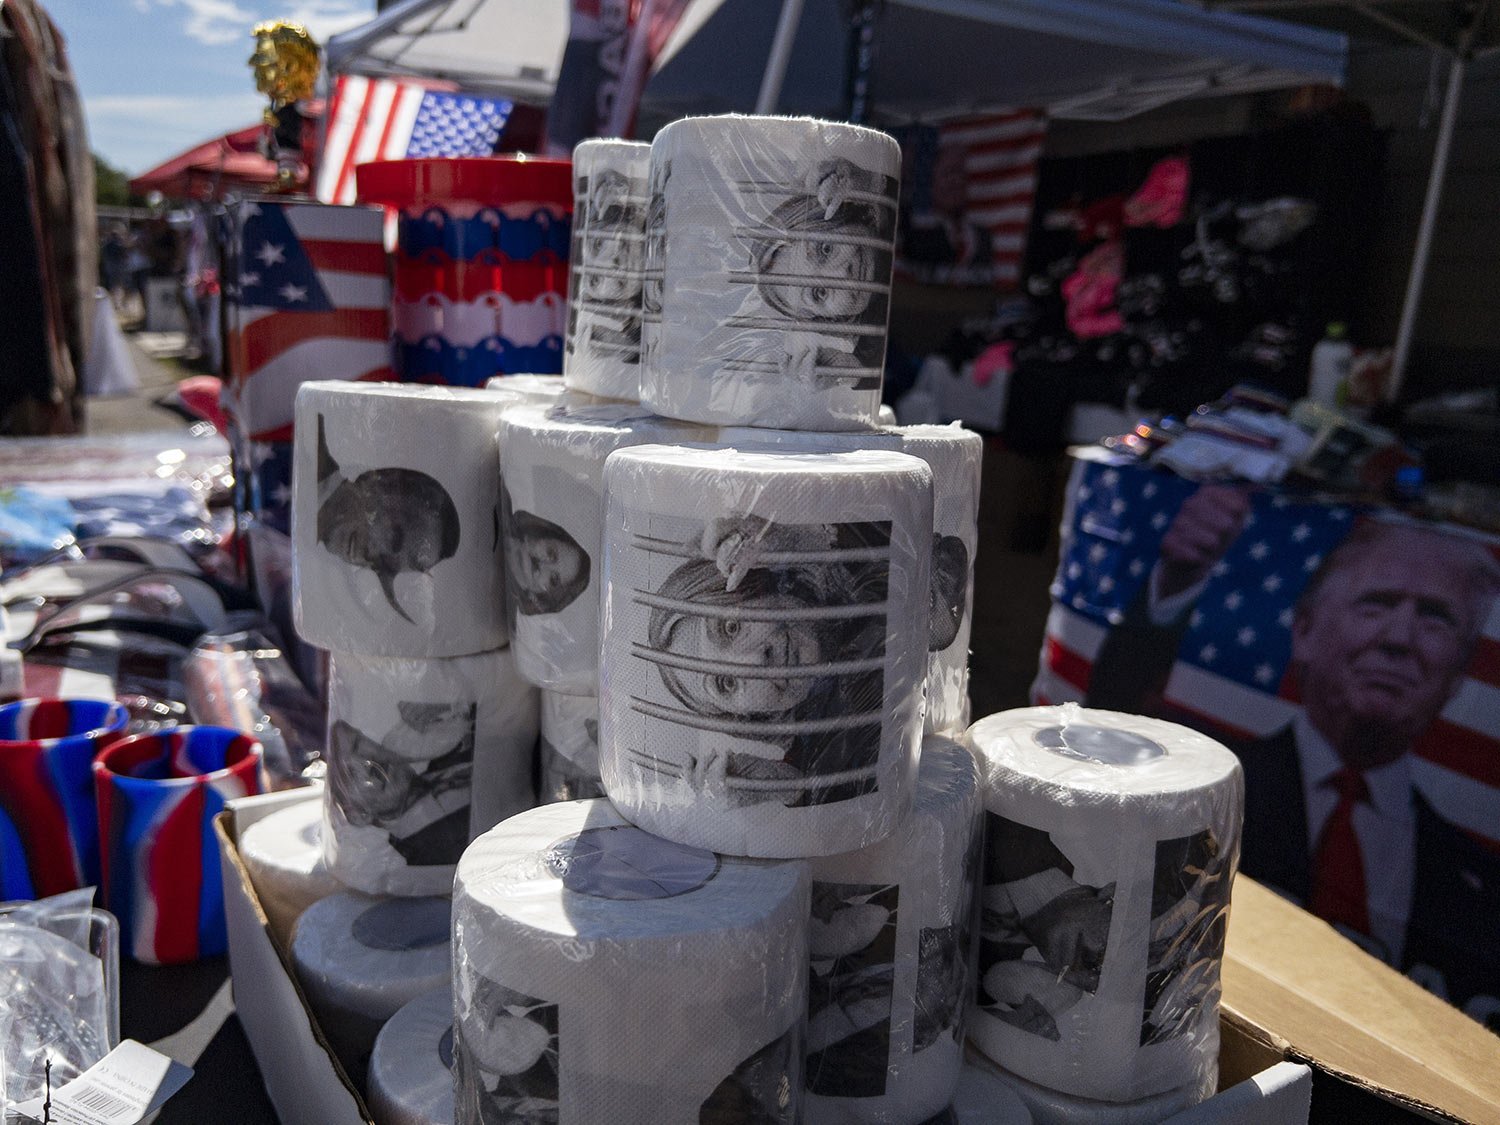  Merchandise, including toilet paper with the image of former Secretary of State Hillary Clinton behind prison bars, is displayed during the ReAwaken America Tour at Cornerstone Church in Batavia, N.Y., Aug. 13, 2022. (AP Photo/Carolyn Kaster) 